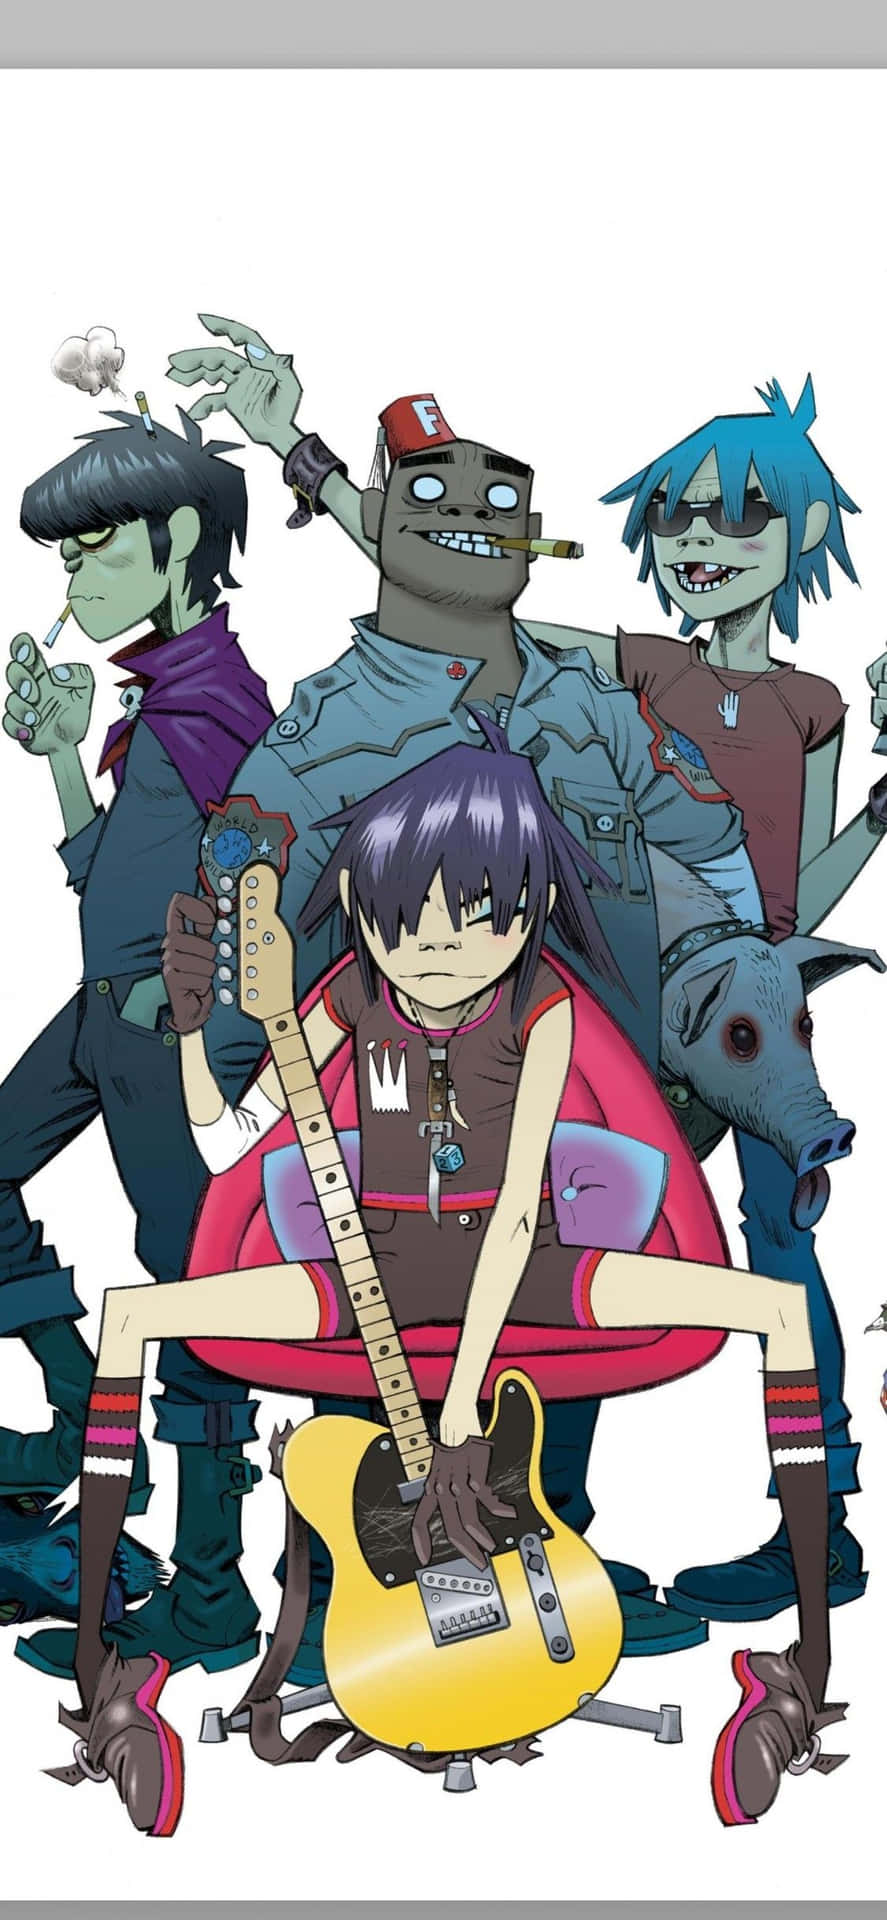 Gorillaz Iphone Band Members Noodle At The Center